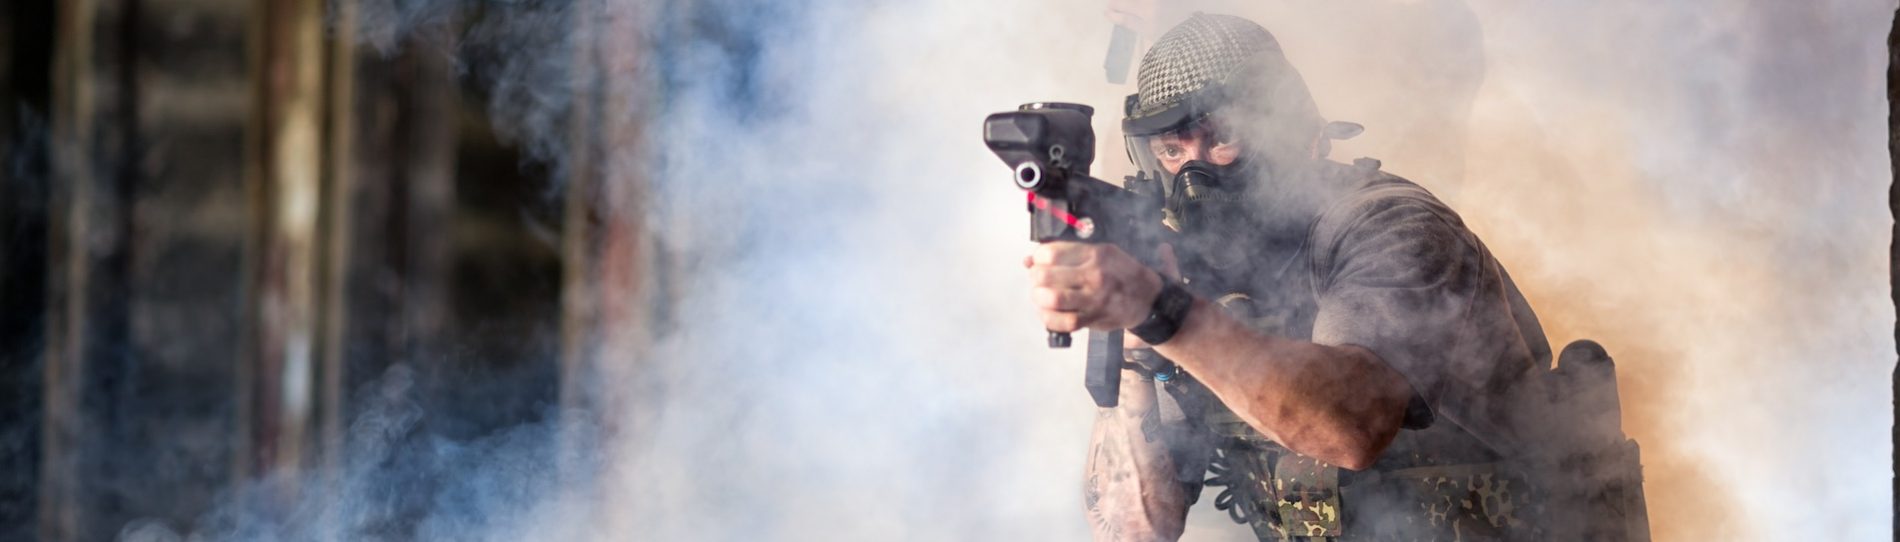 army man shooting paintball gun surrounded by smoke